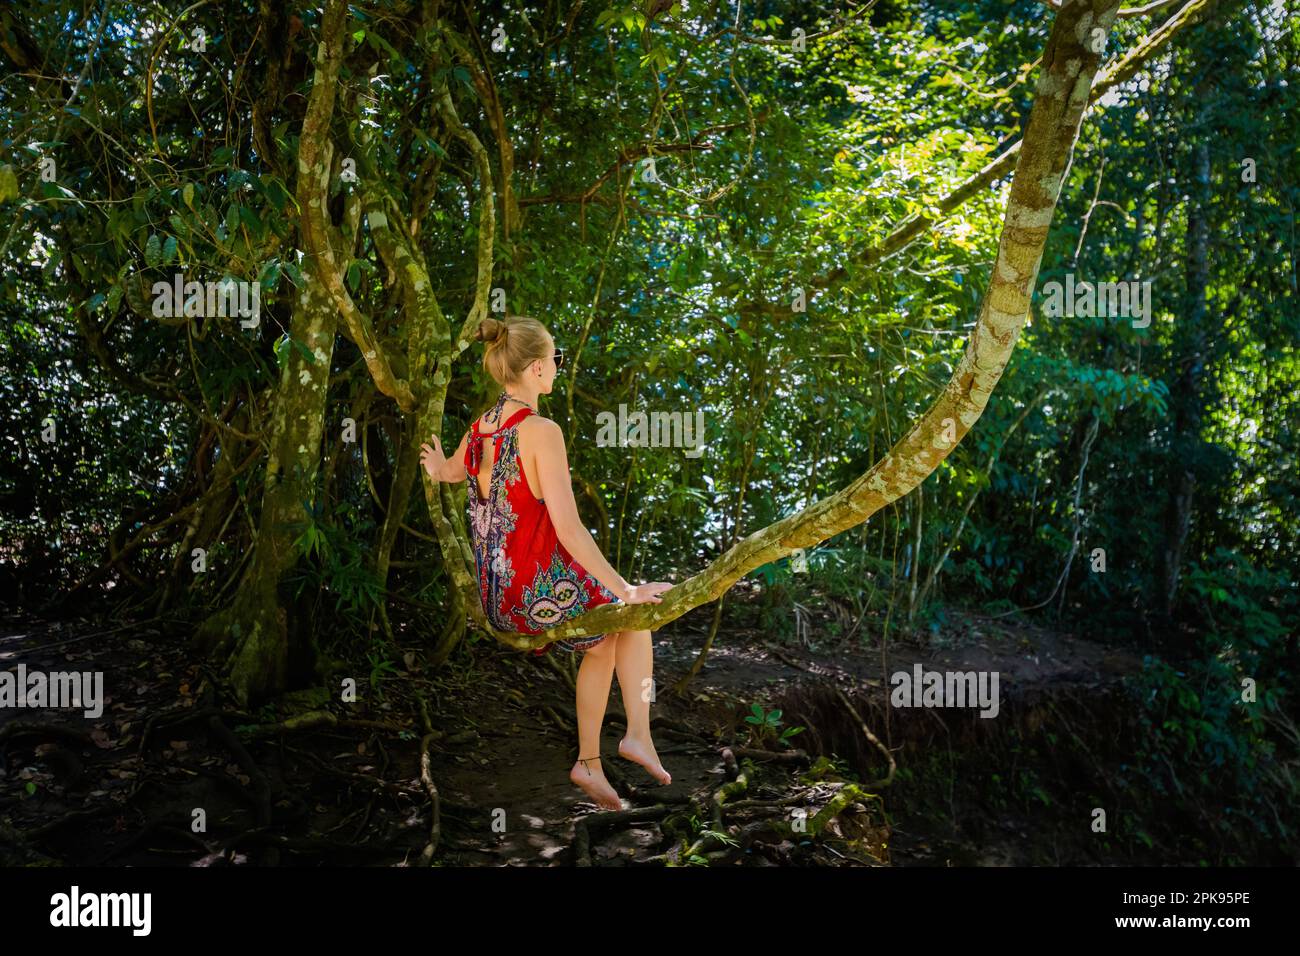 Young pretty woman in Roberto Barrios cascadas park, sitting on a tree, Palenque in Mexico. Vivid landscape photo with lush green during sunny day. Stock Photo